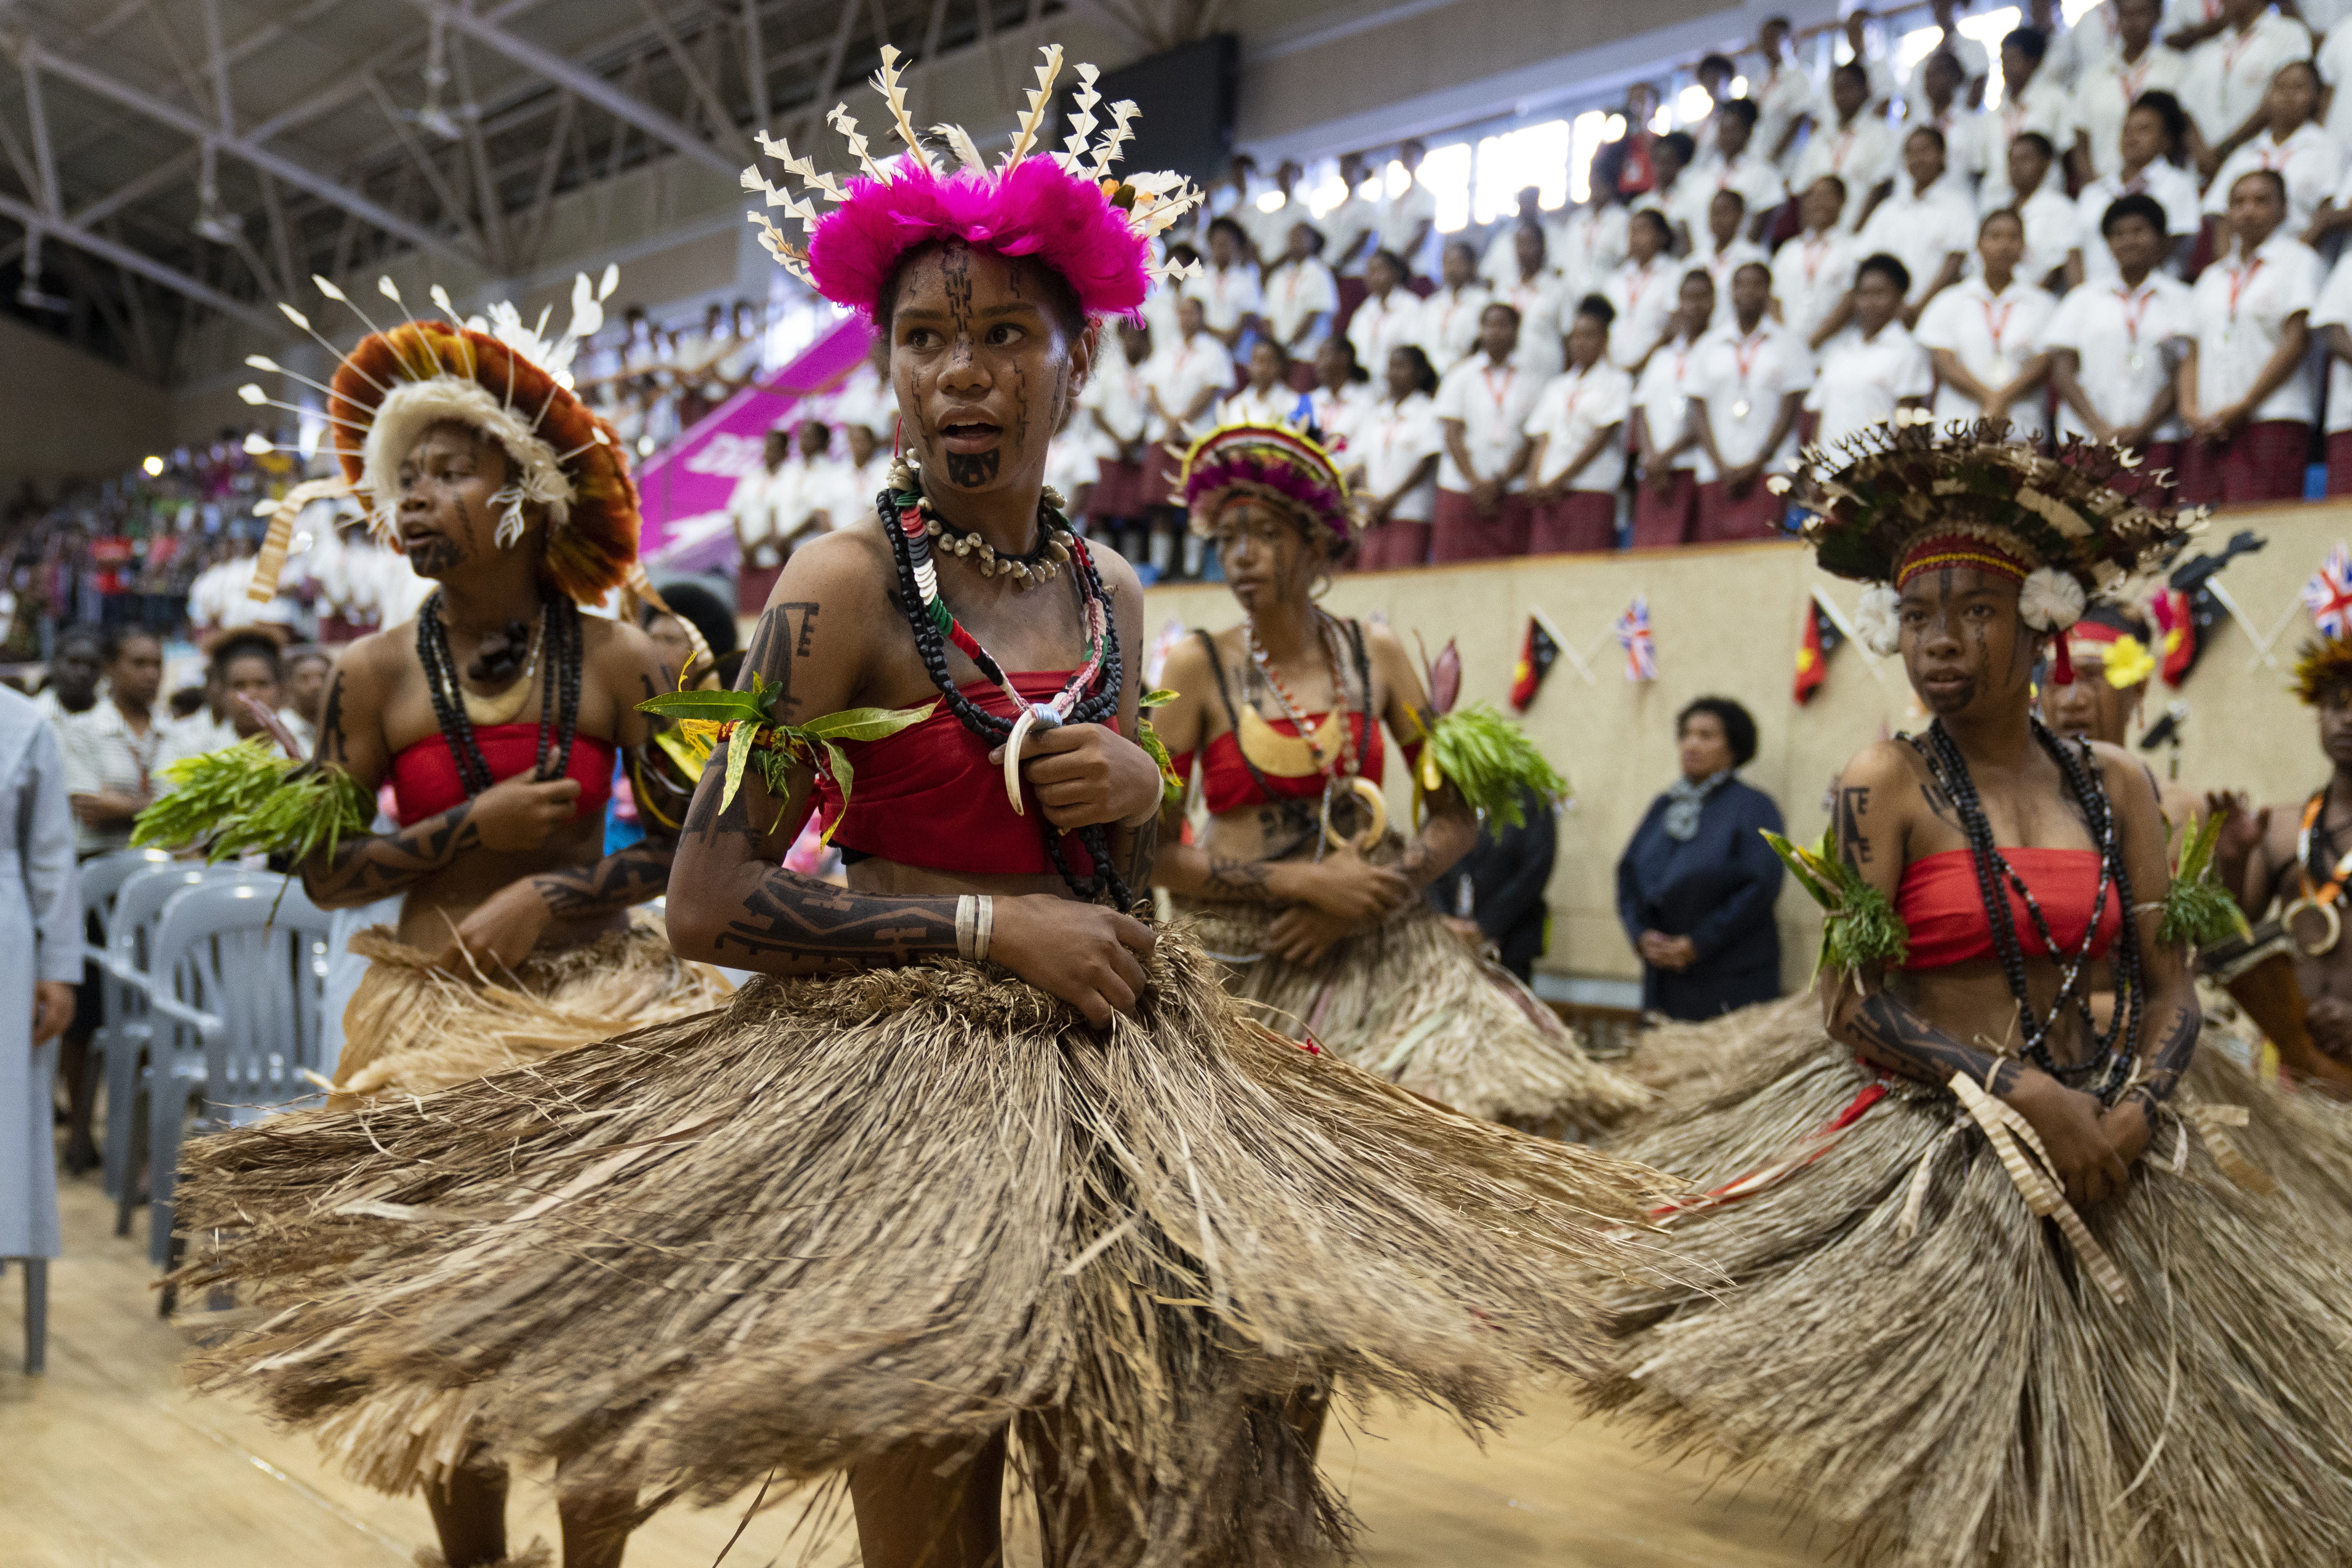 The Princess Royal was given a red-carpet welcome by pupils in traditional dress on her second day in Papua New Guinea as part of her tour marking the Queen’s Platinum Jubilee (Kirsty O’Connor/PA)